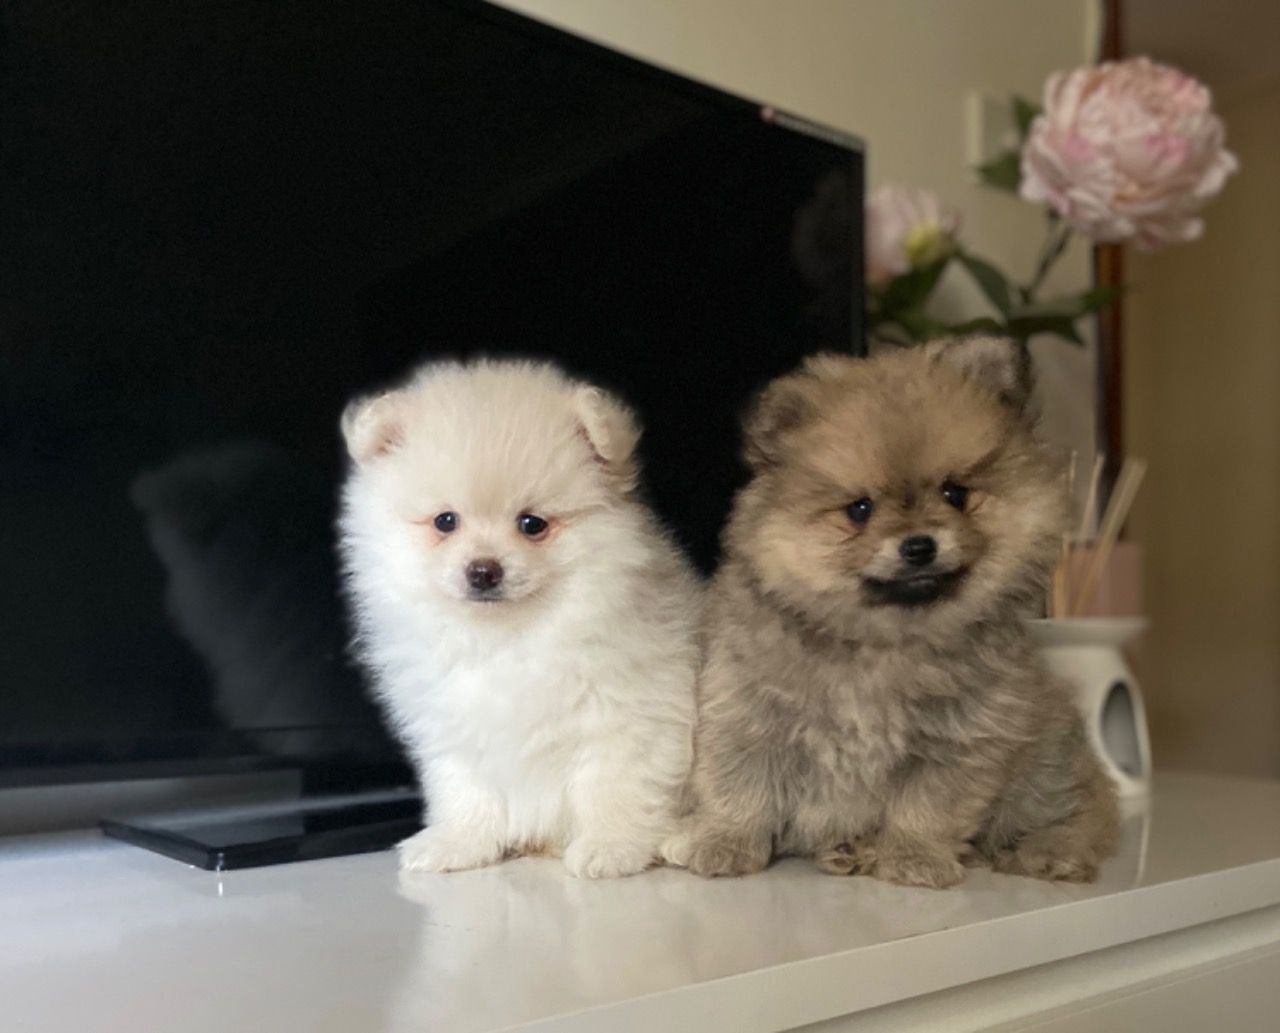 We have 4 beautiful puppies, they are kc registered. Puppies are well socialized. These pups have an Amazing structure, short and very compact All raised in our loving home surrounded by daily household chores